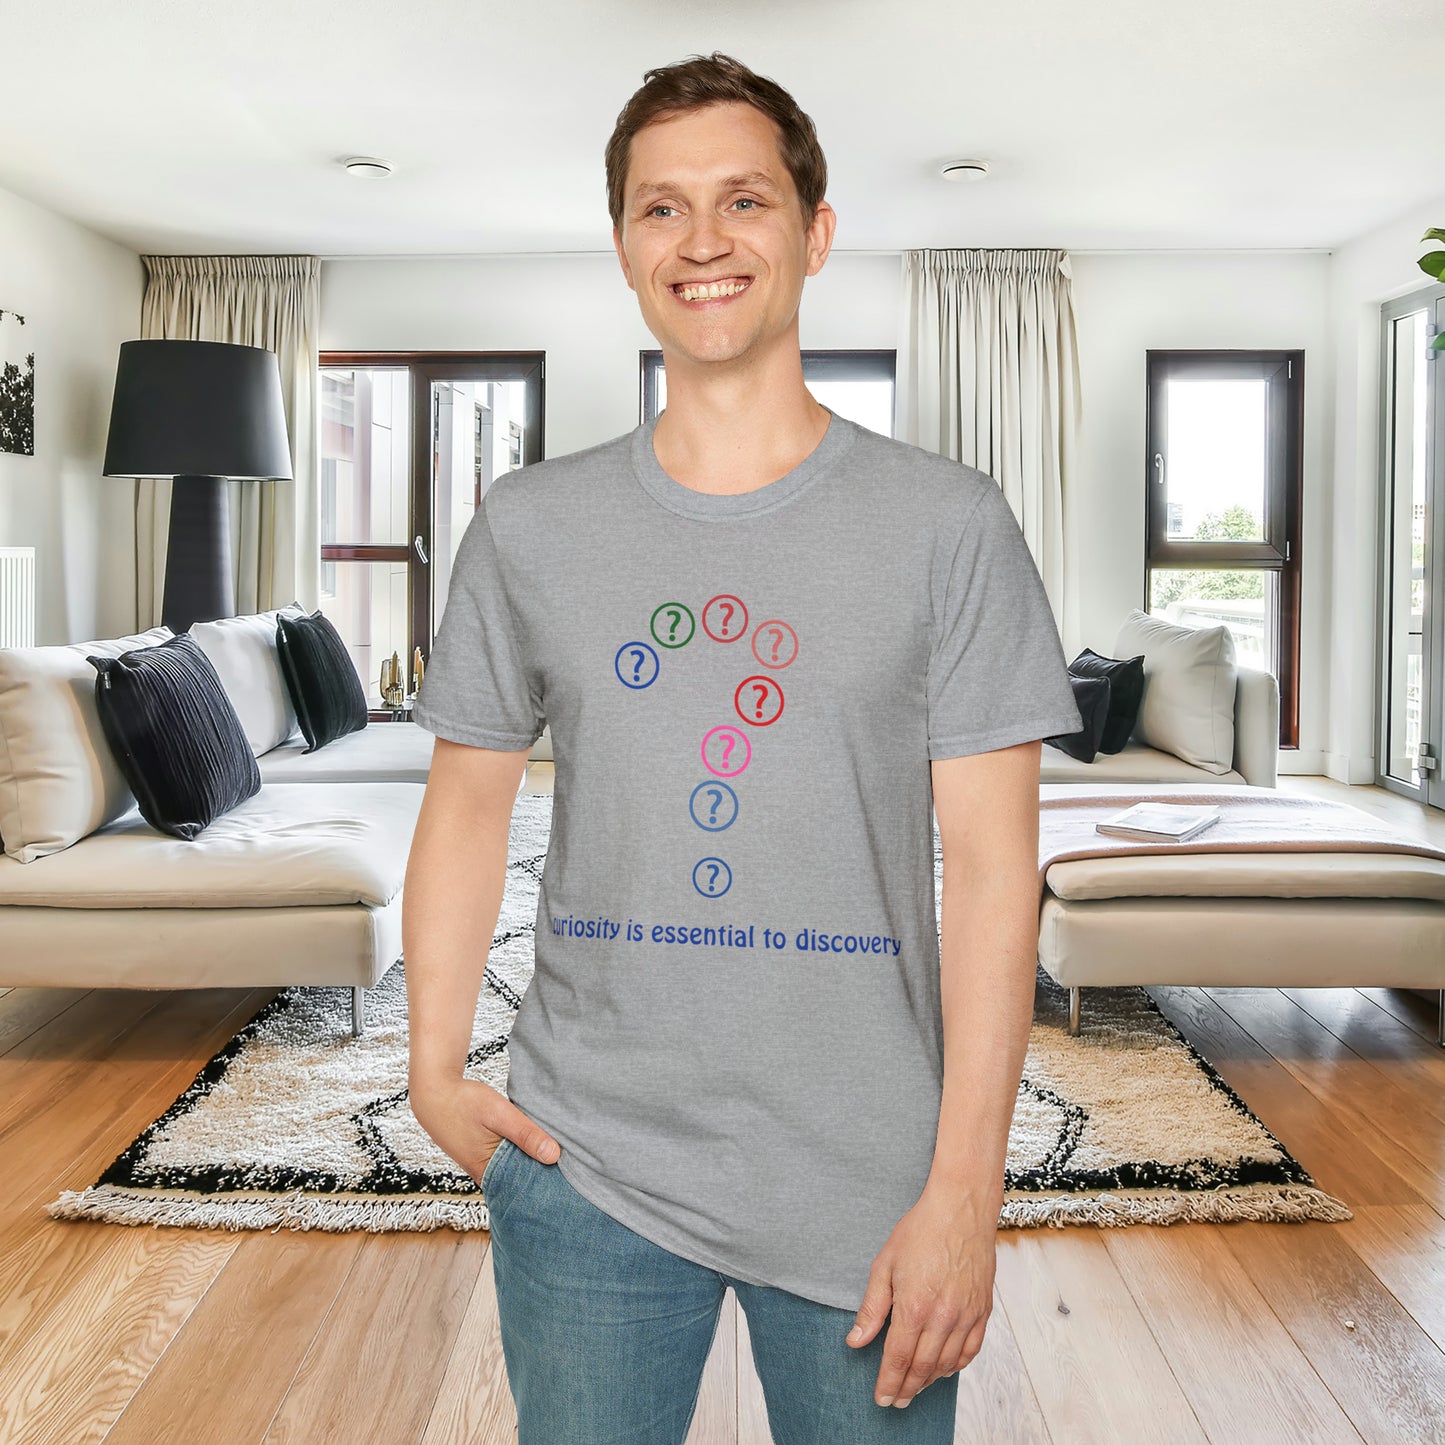 A question mark made of question marks above “curiosity is essential to discovery” message design on this Unisex Softstyle T-Shirt design.